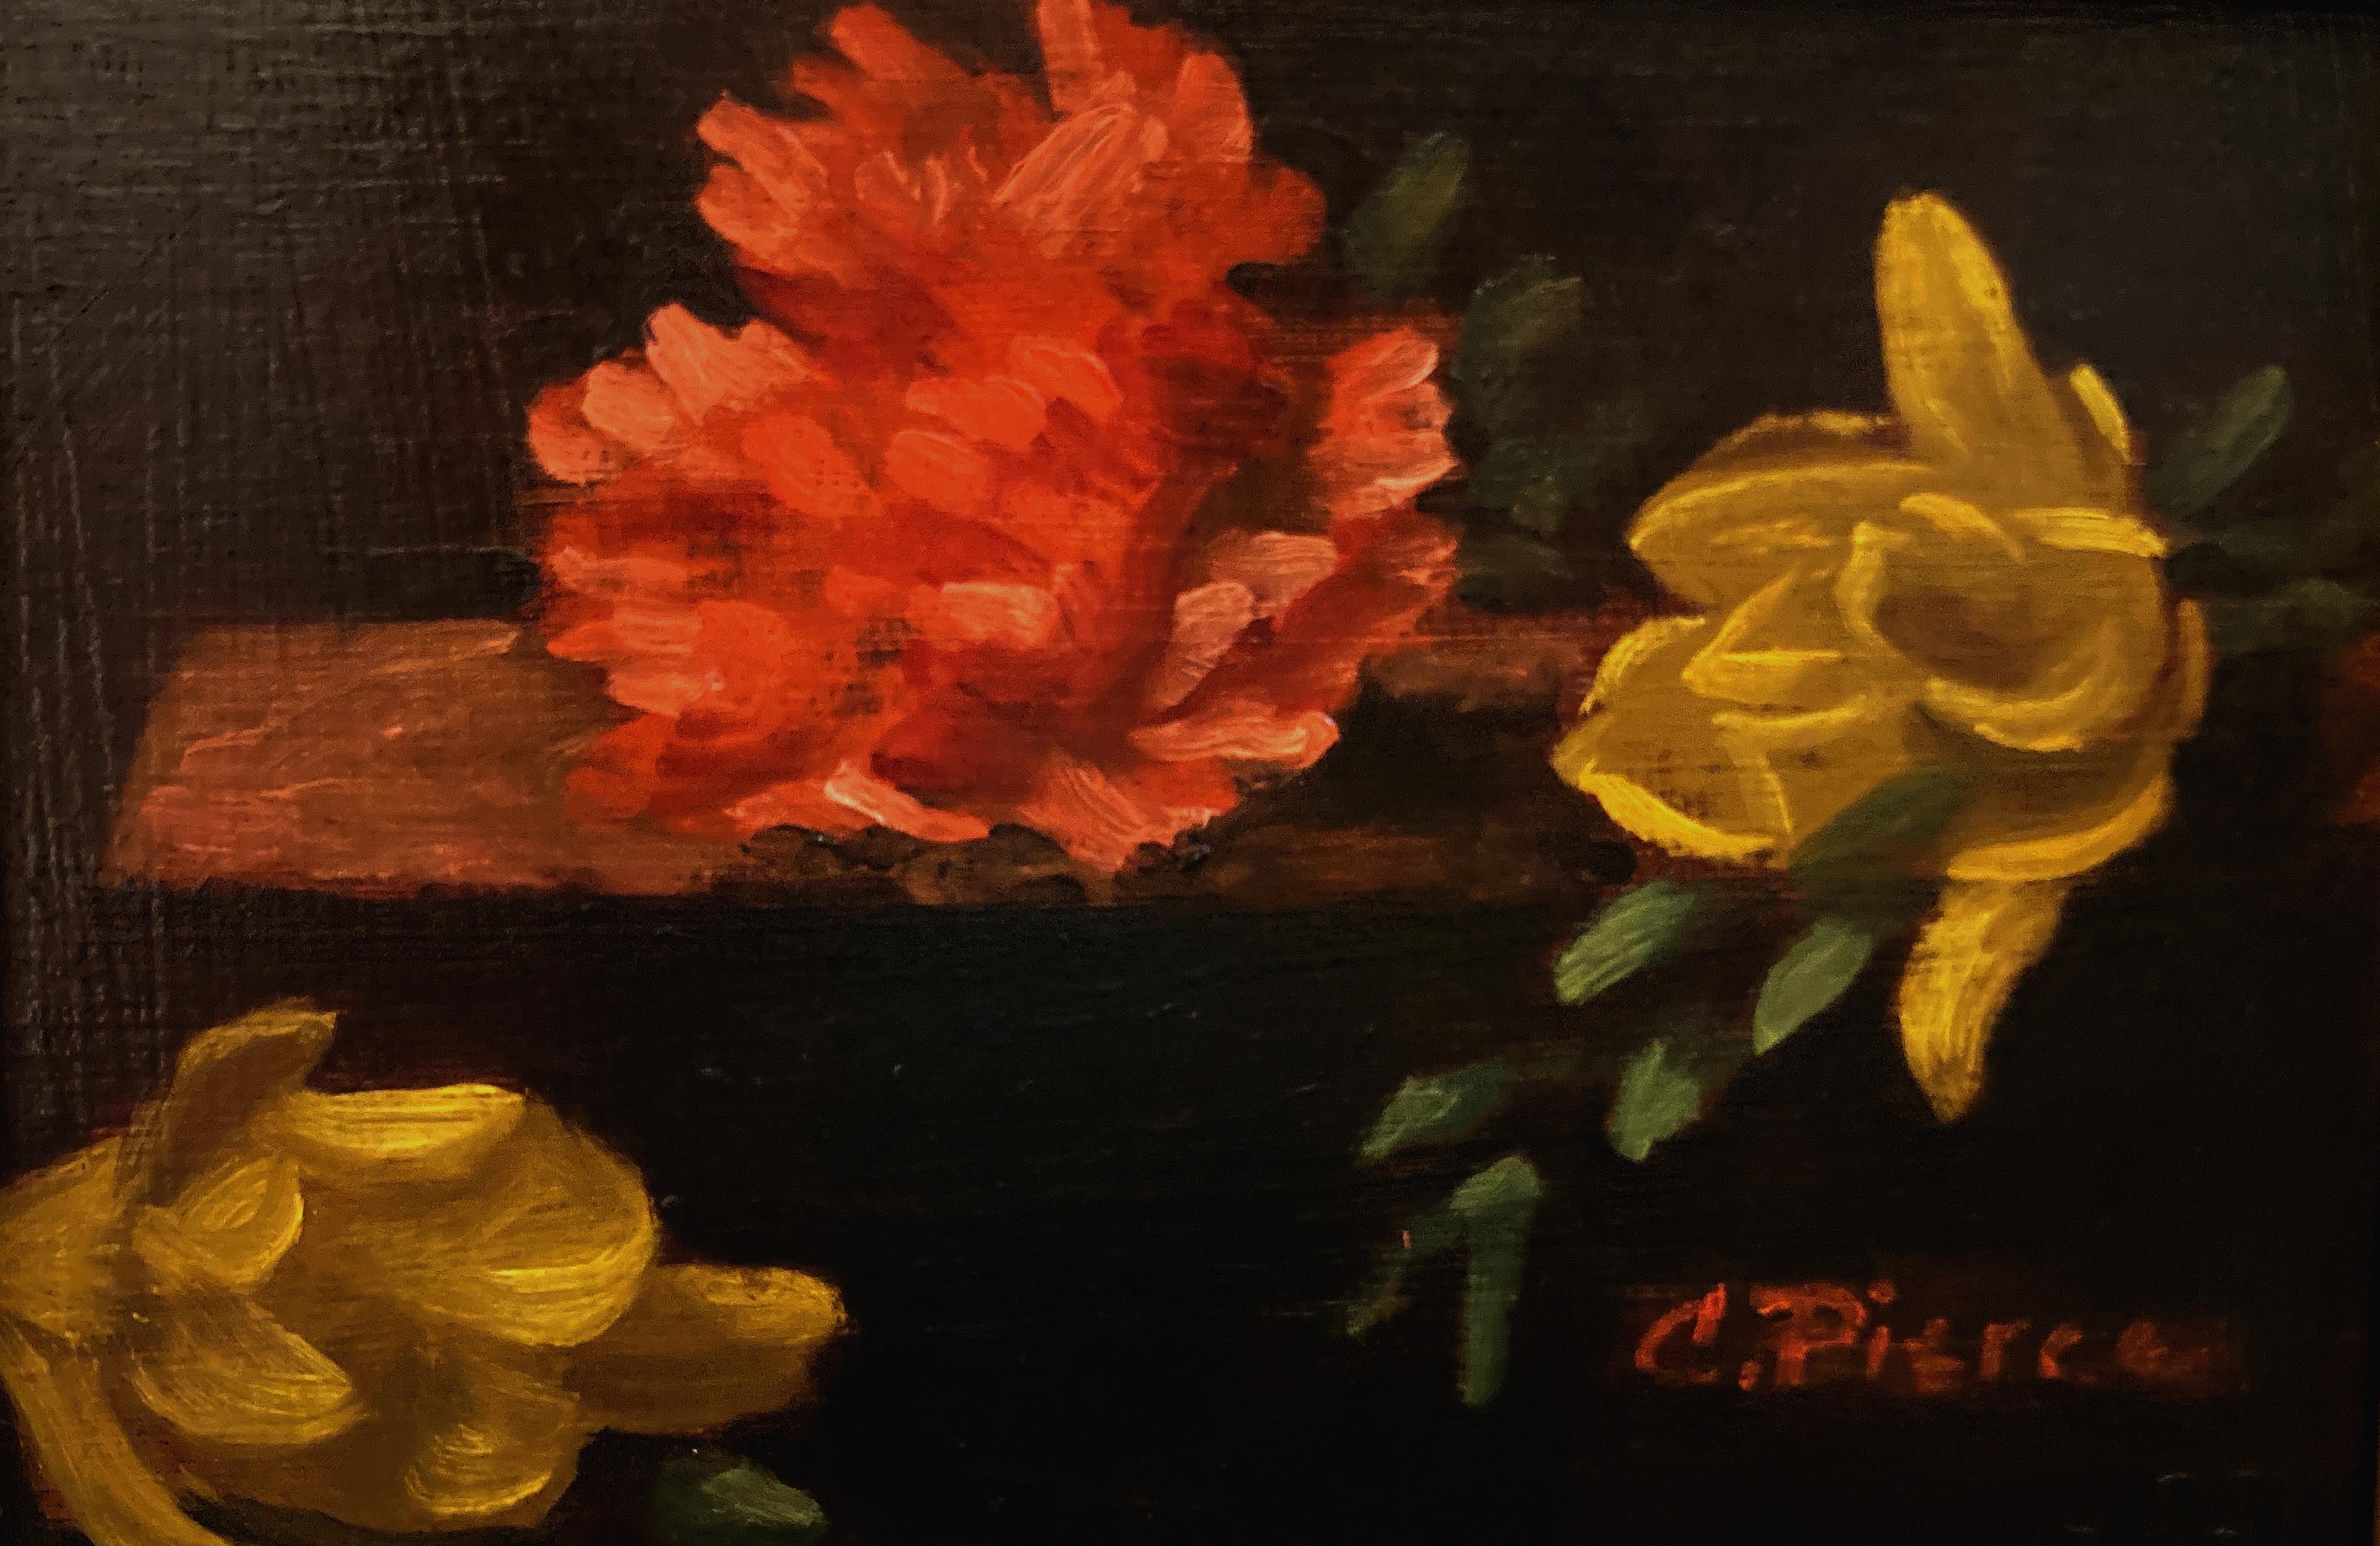 Christopher Pierce, "Yellow and Peach", 5x7 Floral Oil Painting on Board